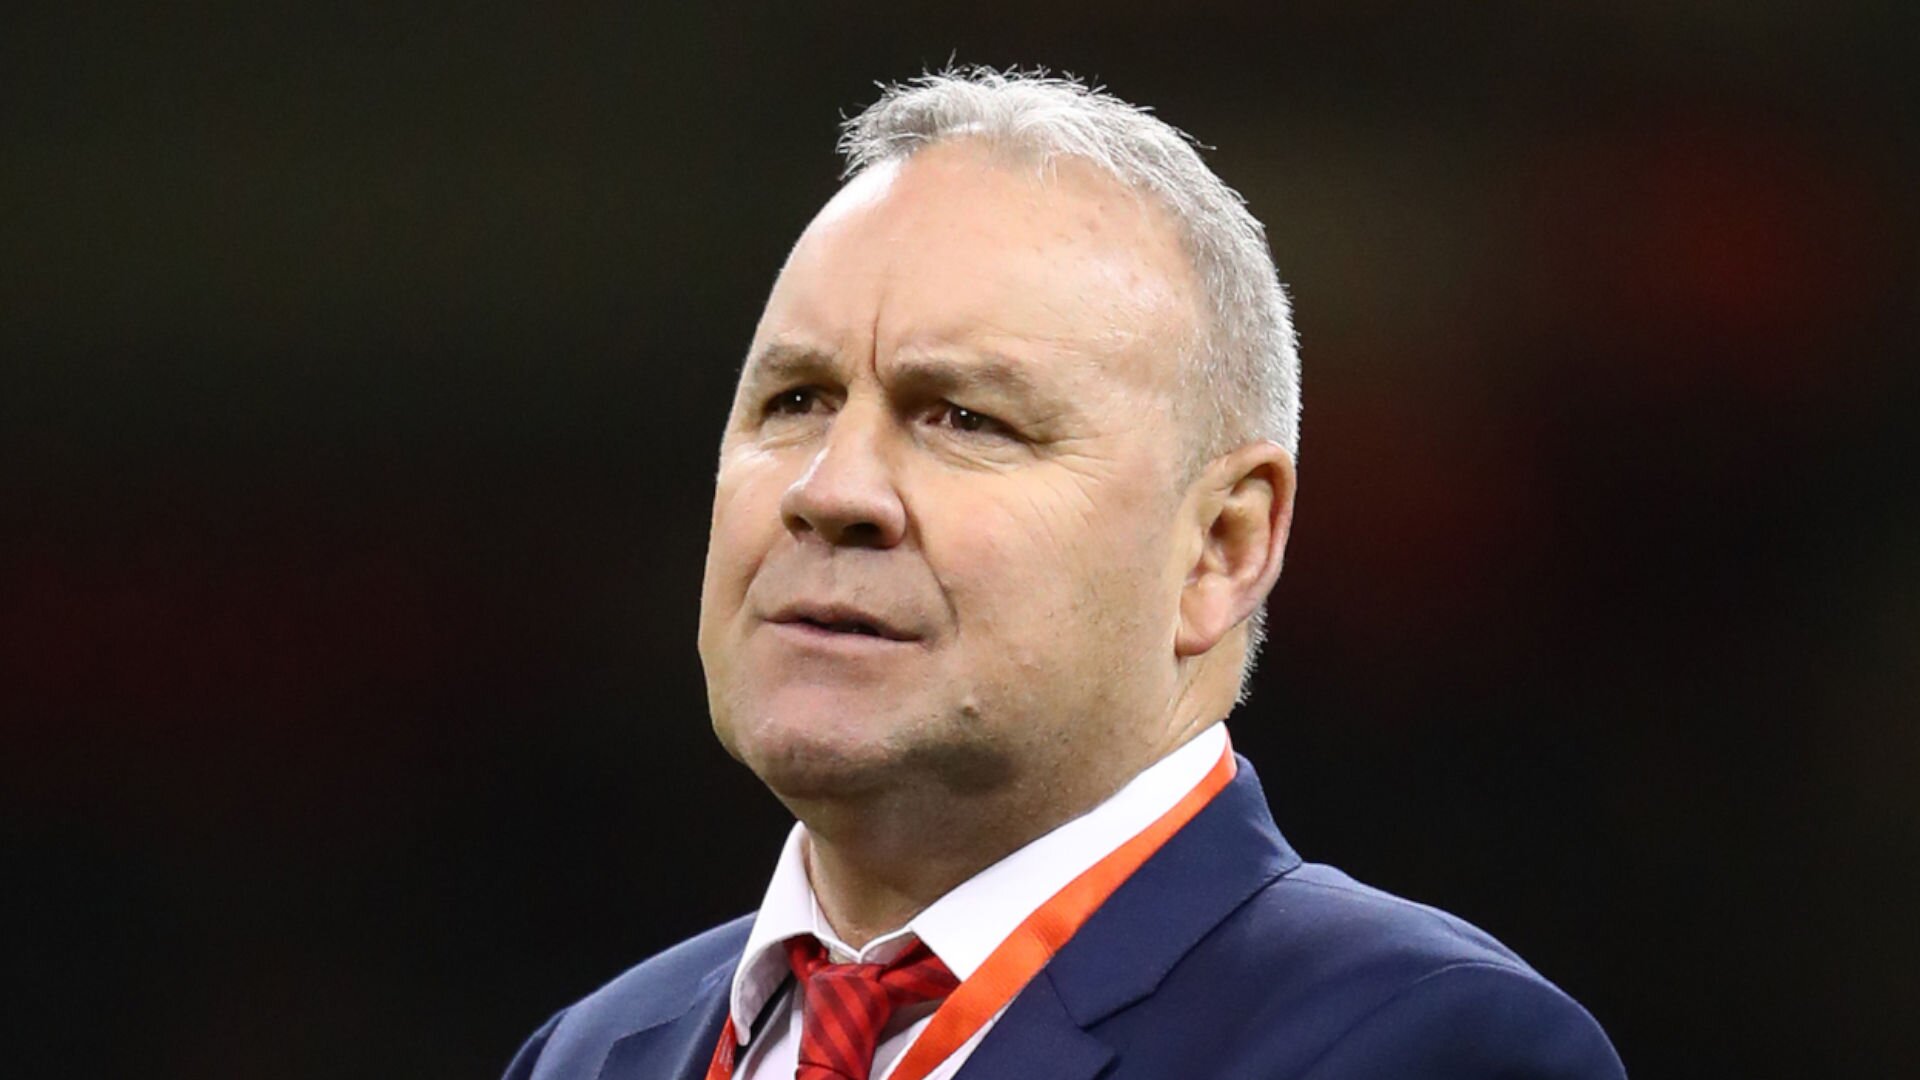 Wayne Pivac's trusted Wales defence coach Hayward sacked with 'immediate effect'